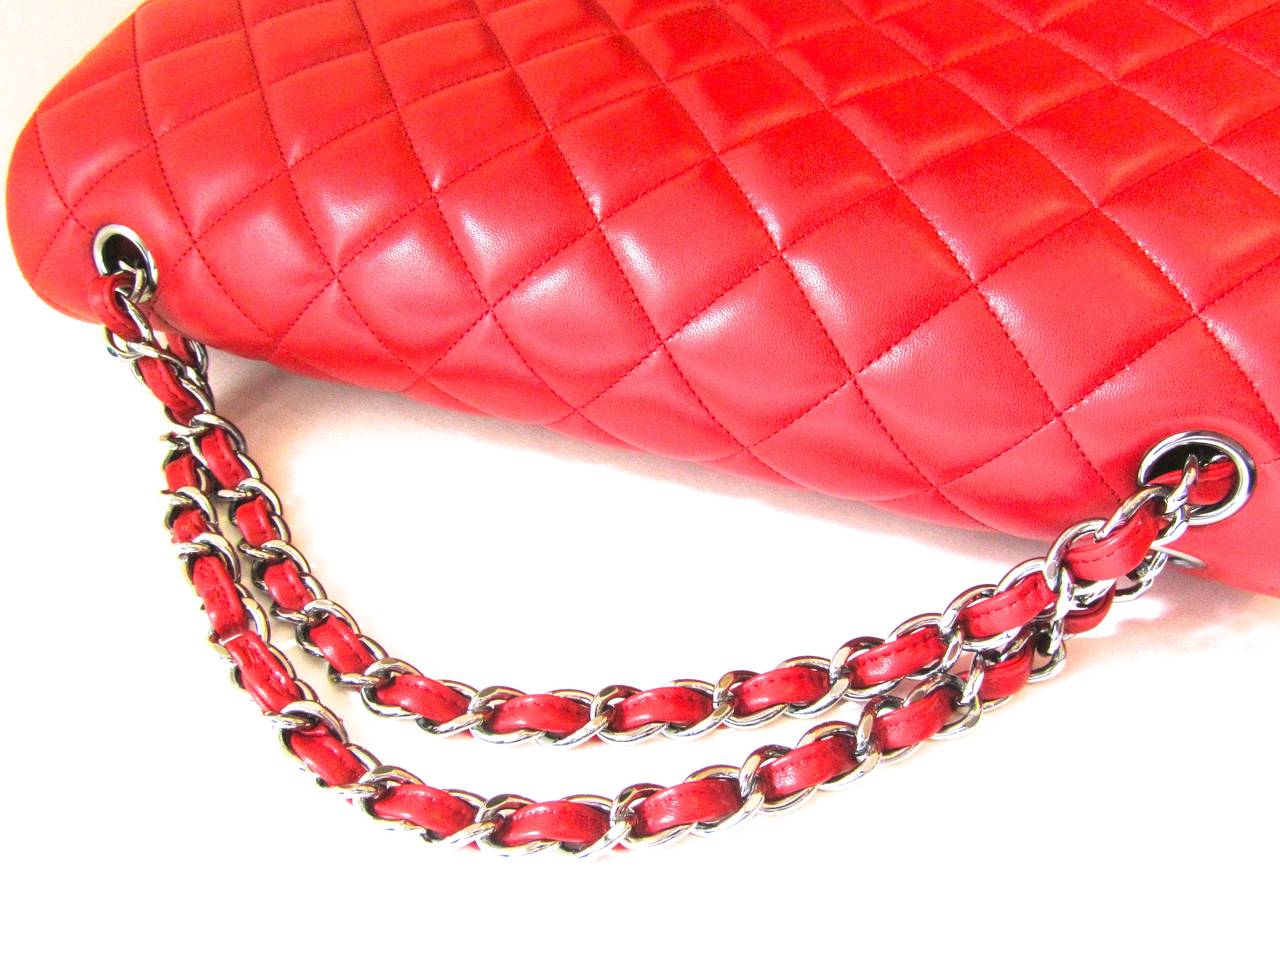 Women's New CHANEL Classic Double Flap Maxi Bag - Red